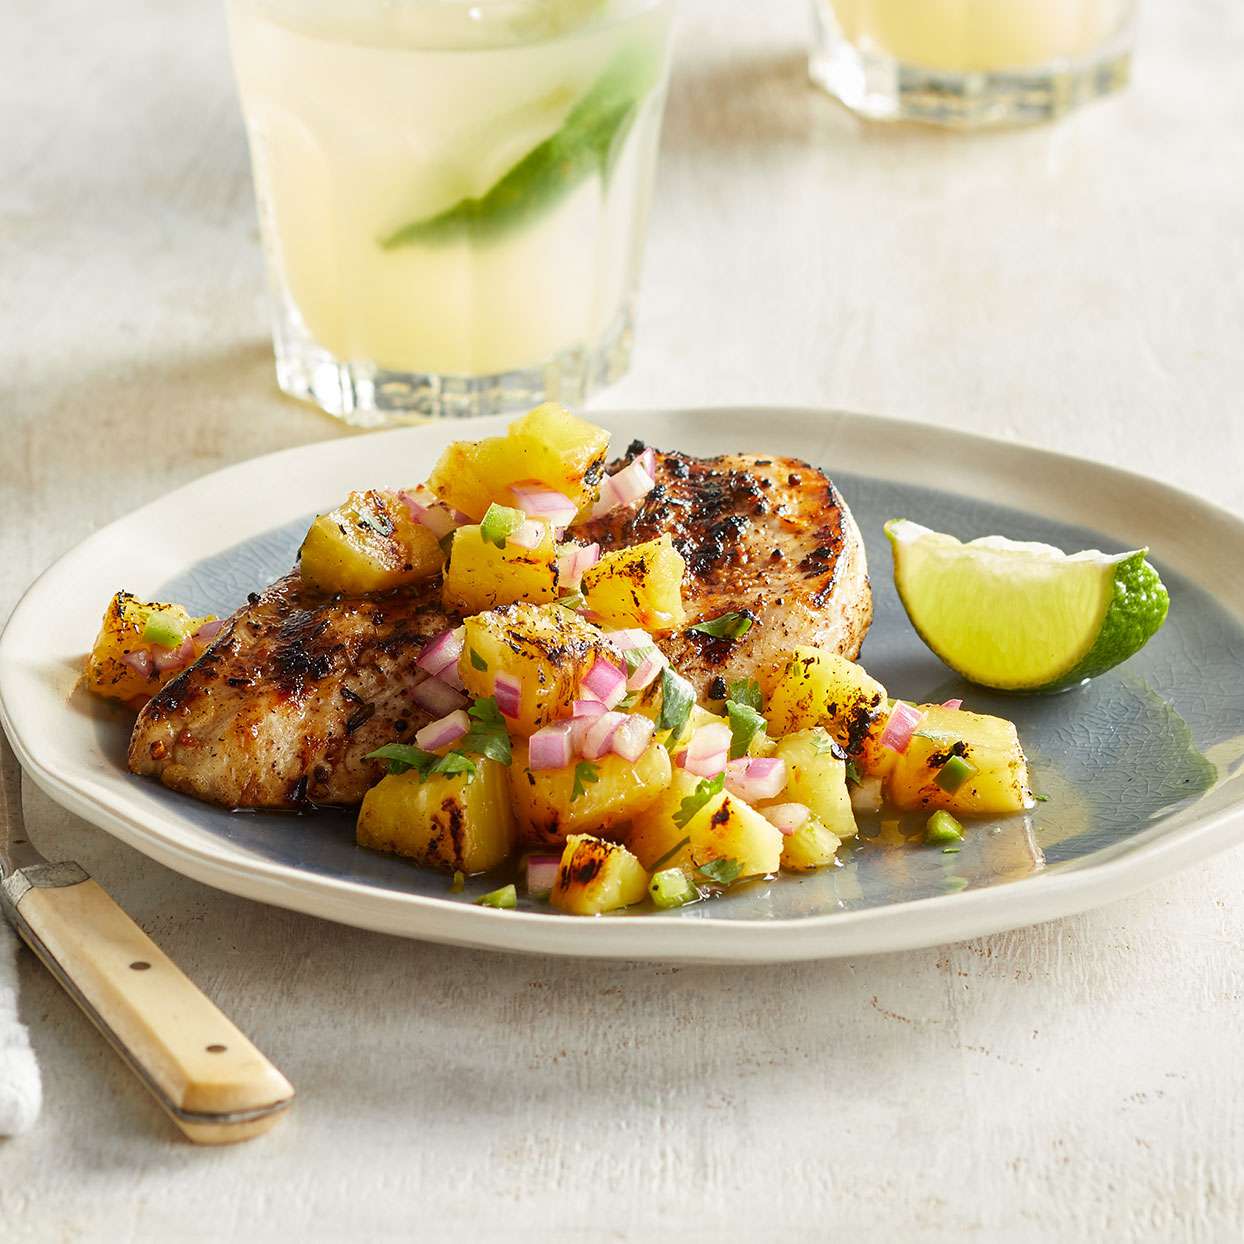 Jerk-Spiced Chicken with Charred Pineapple Salsa